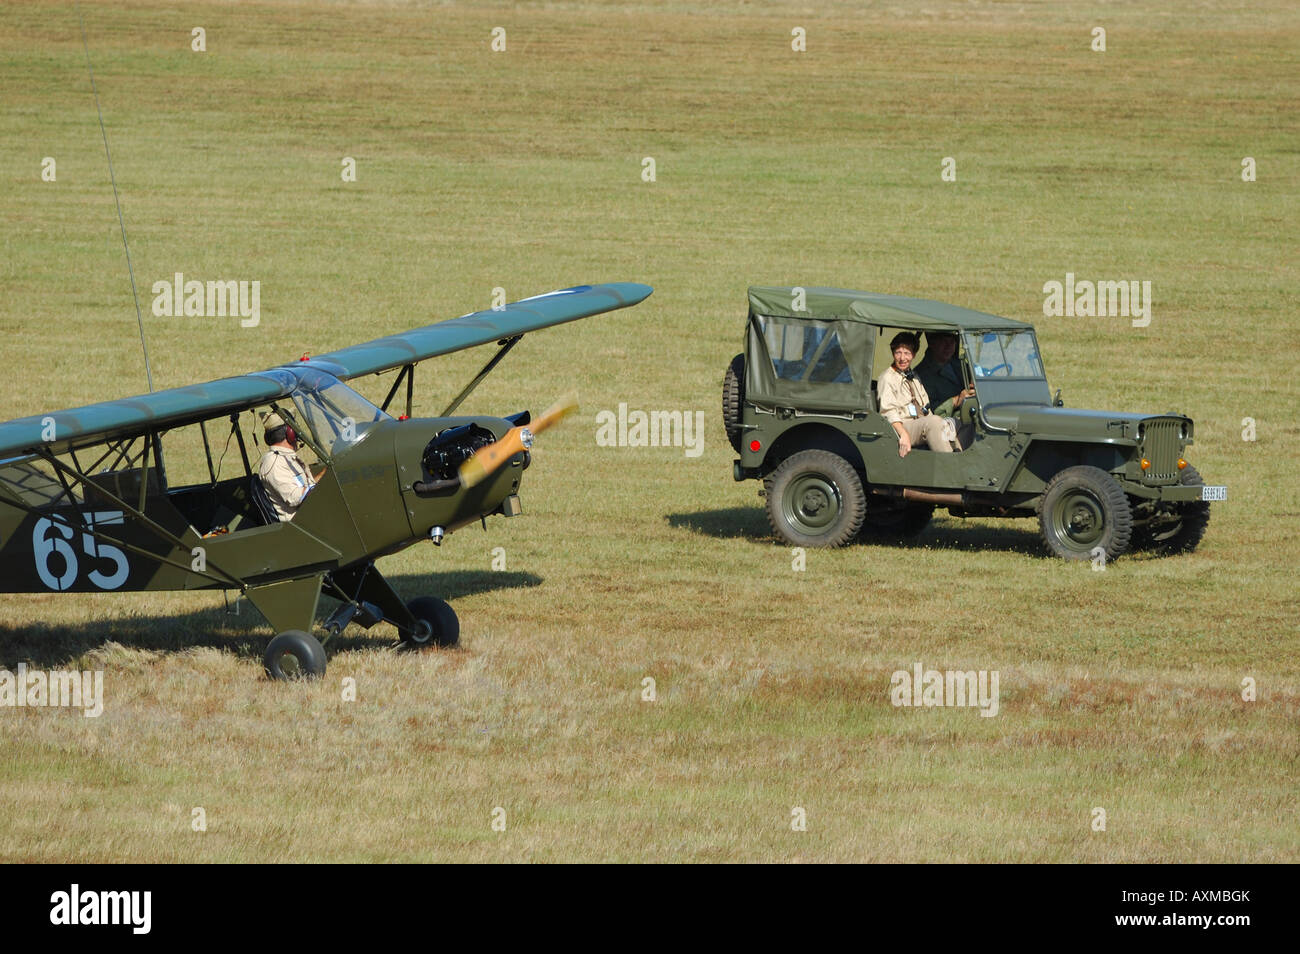 Old Piper J-3 Cub (L-4) plane anf famous Jepp car used during WWII in Europe by us army. Stock Photo